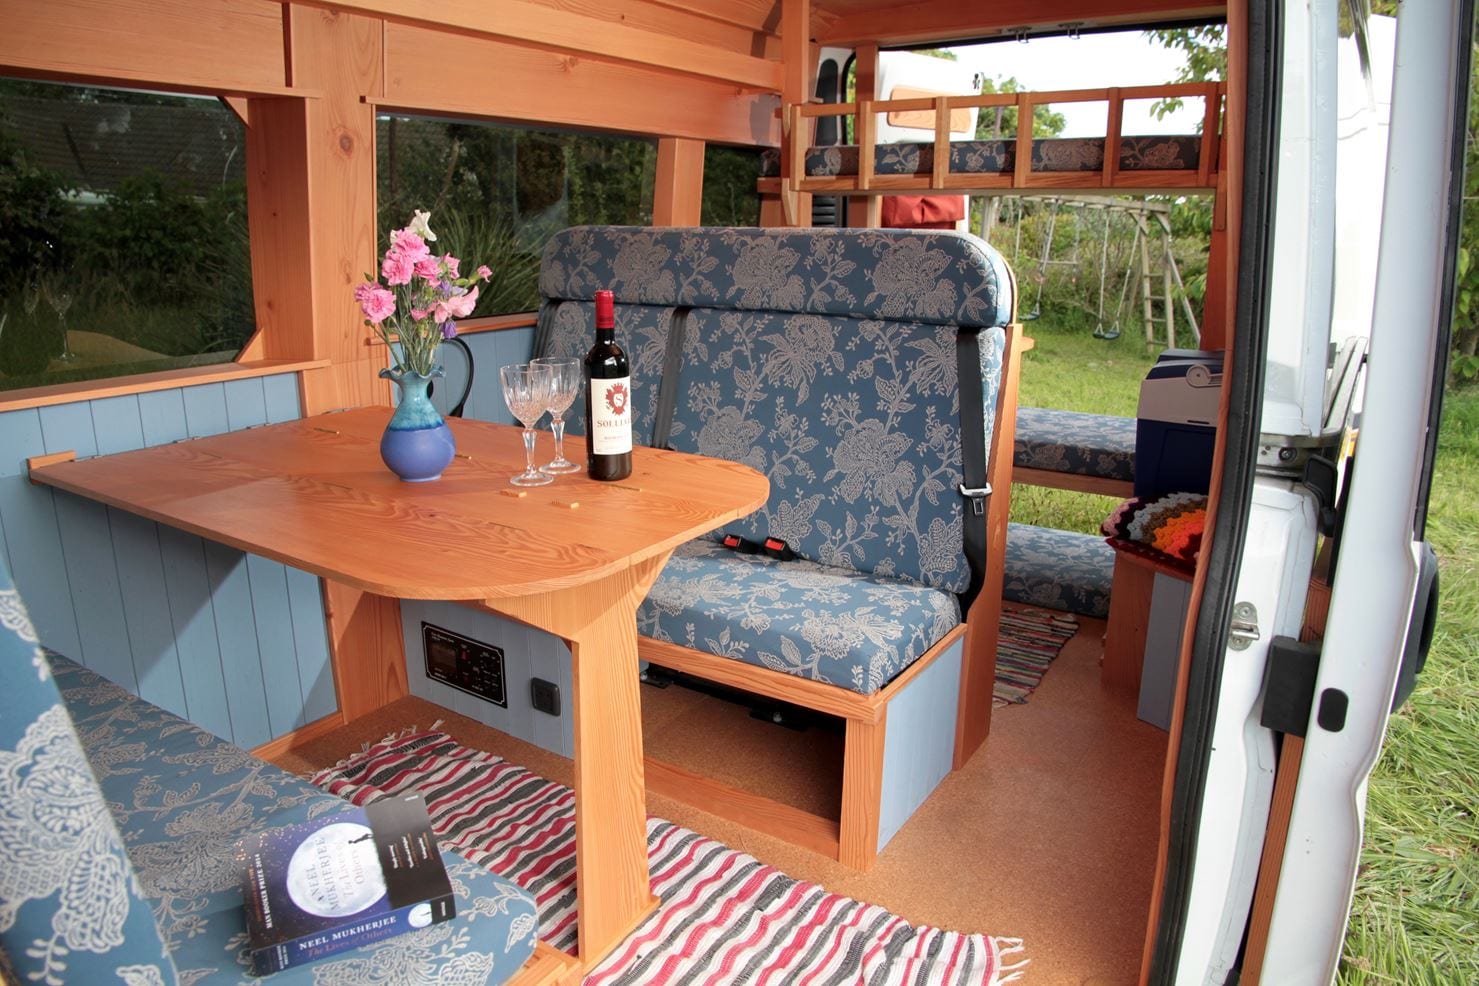 The interior of a cozy camper van with wooden furnishings is shown. A table set with two wine glasses, a bottle of wine, and a vase of pink flowers is at the center. Blue cushioned seats with floral patterns, a striped rug, and a shelf with a bed in the background are also visible.